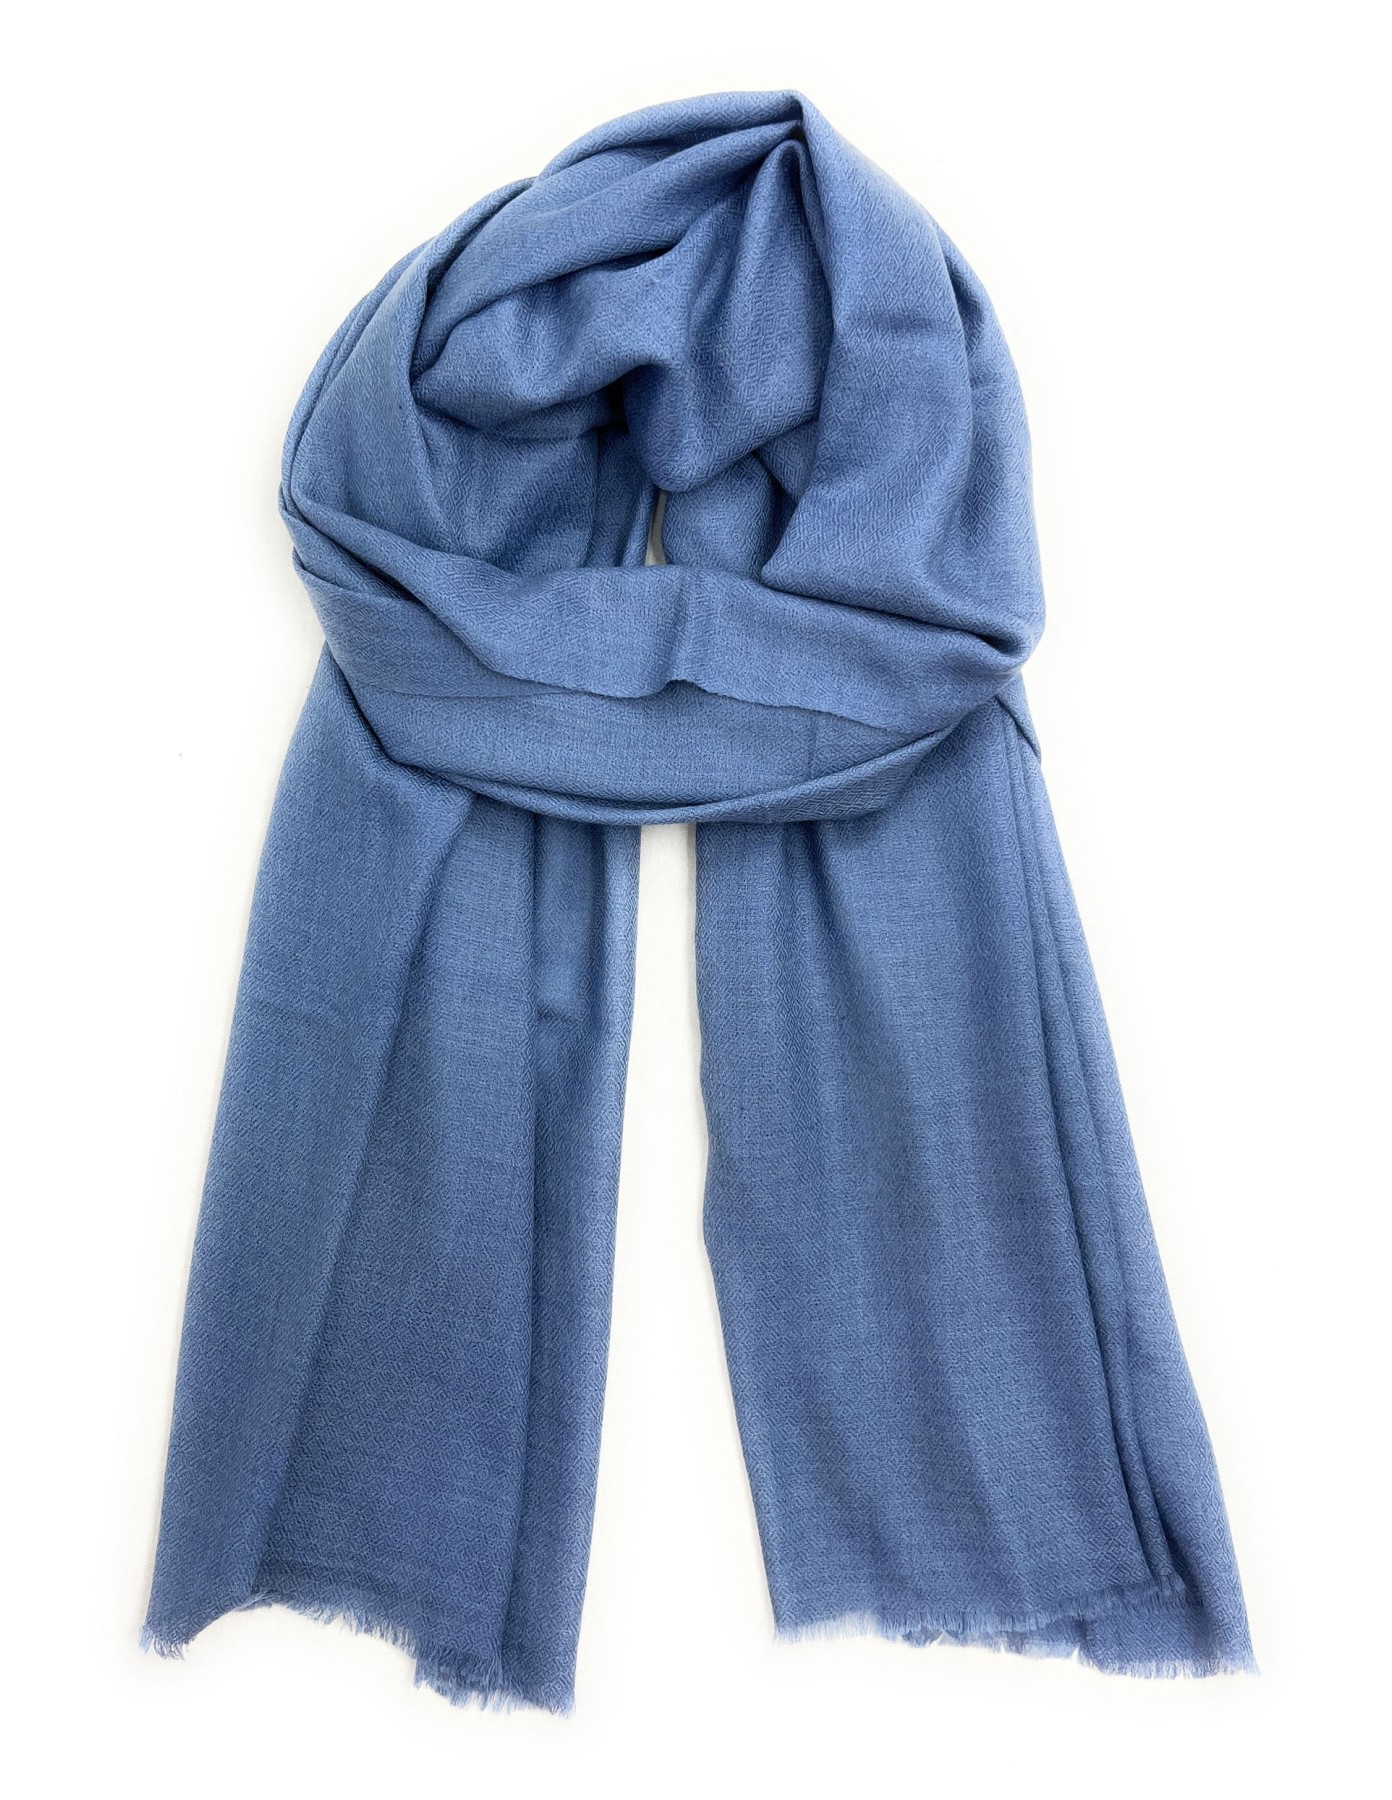 The Pashmeen - Handcrafted Pashmina Shawls, Stoles, Scarves, and More